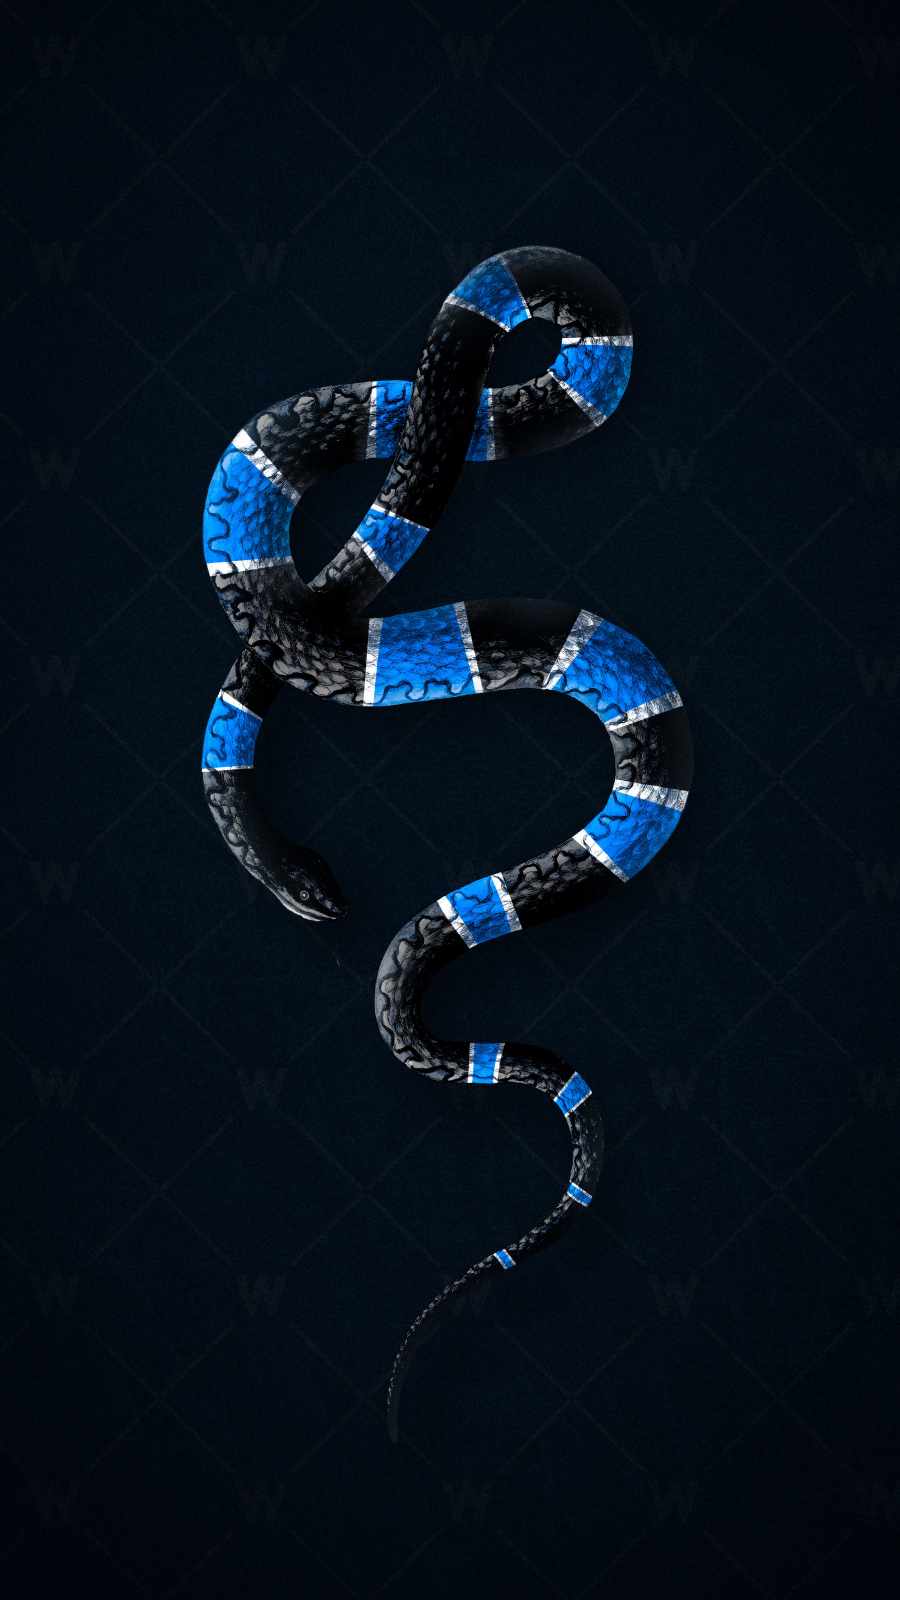 Luxury Snake IPhone Wallpaper - IPhone Wallpapers : iPhone Wallpapers